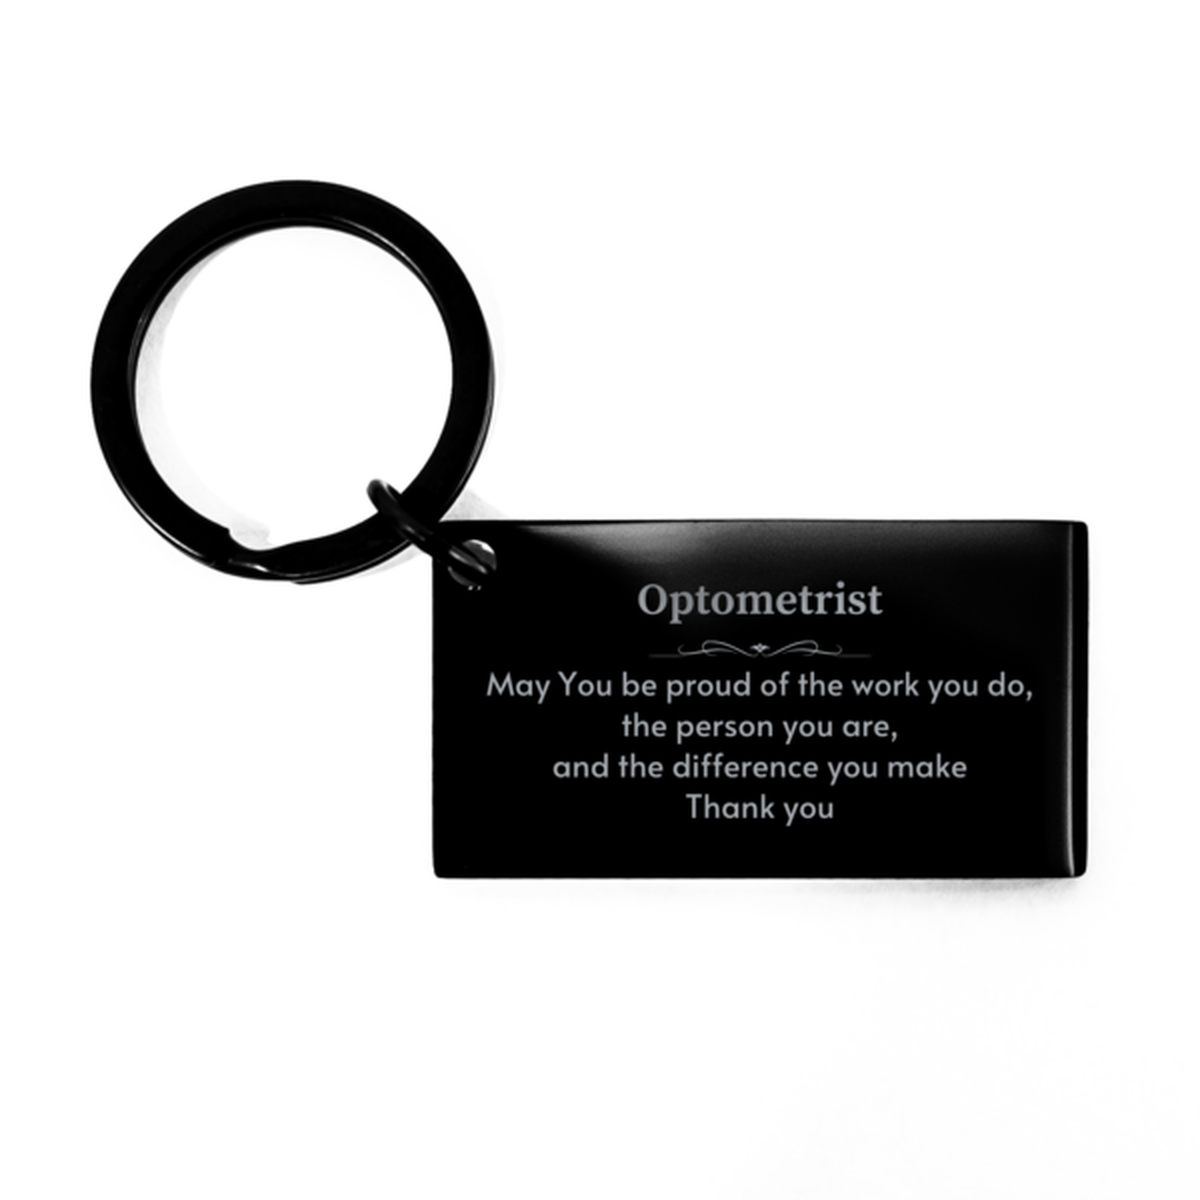 Heartwarming Keychain Retirement Coworkers Gifts for Optometrist, Porter May You be proud of the work you do, the person you are Gifts for Boss Men Women Friends